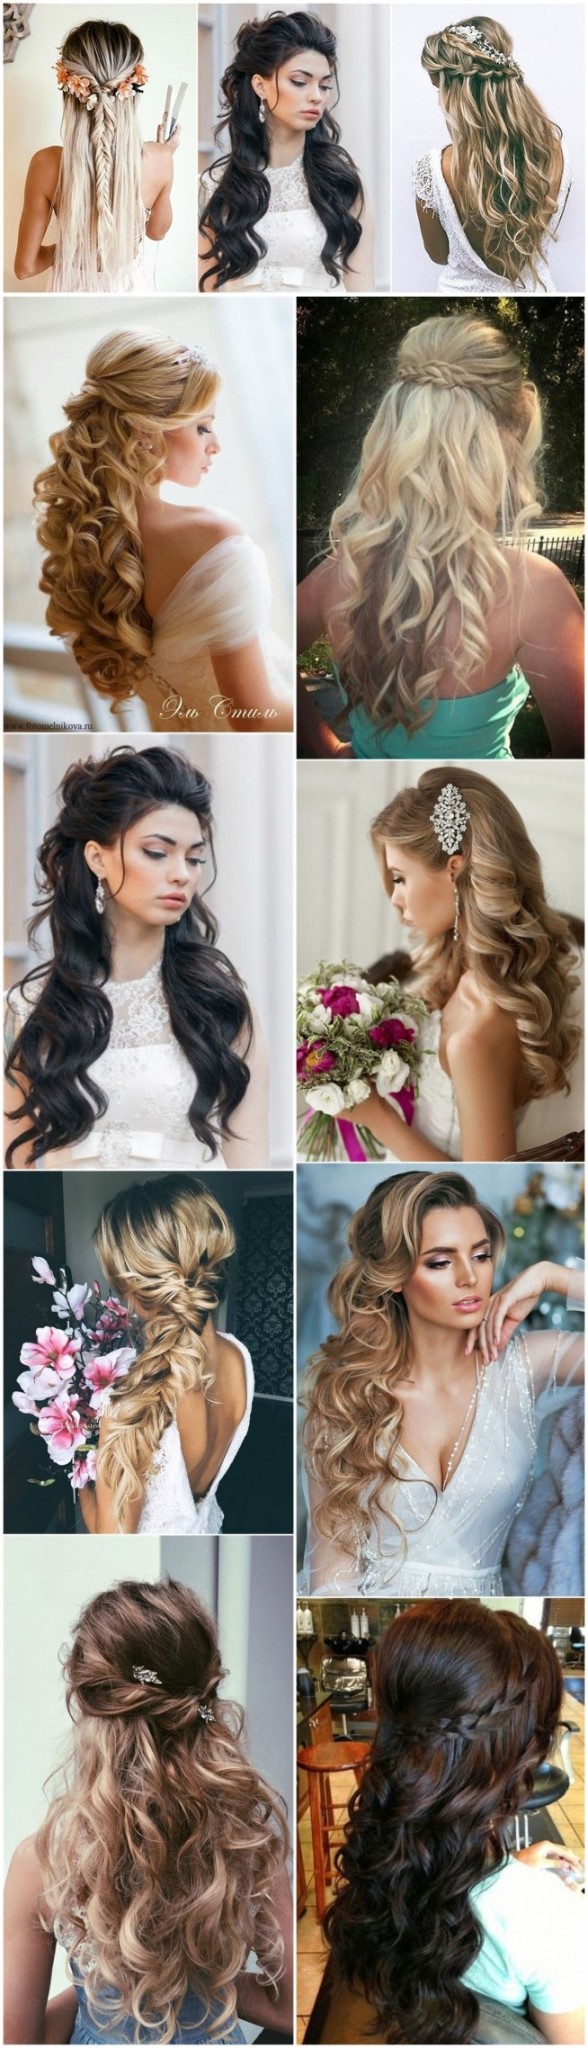 Unique Wedding Hairstyles for Long Hair